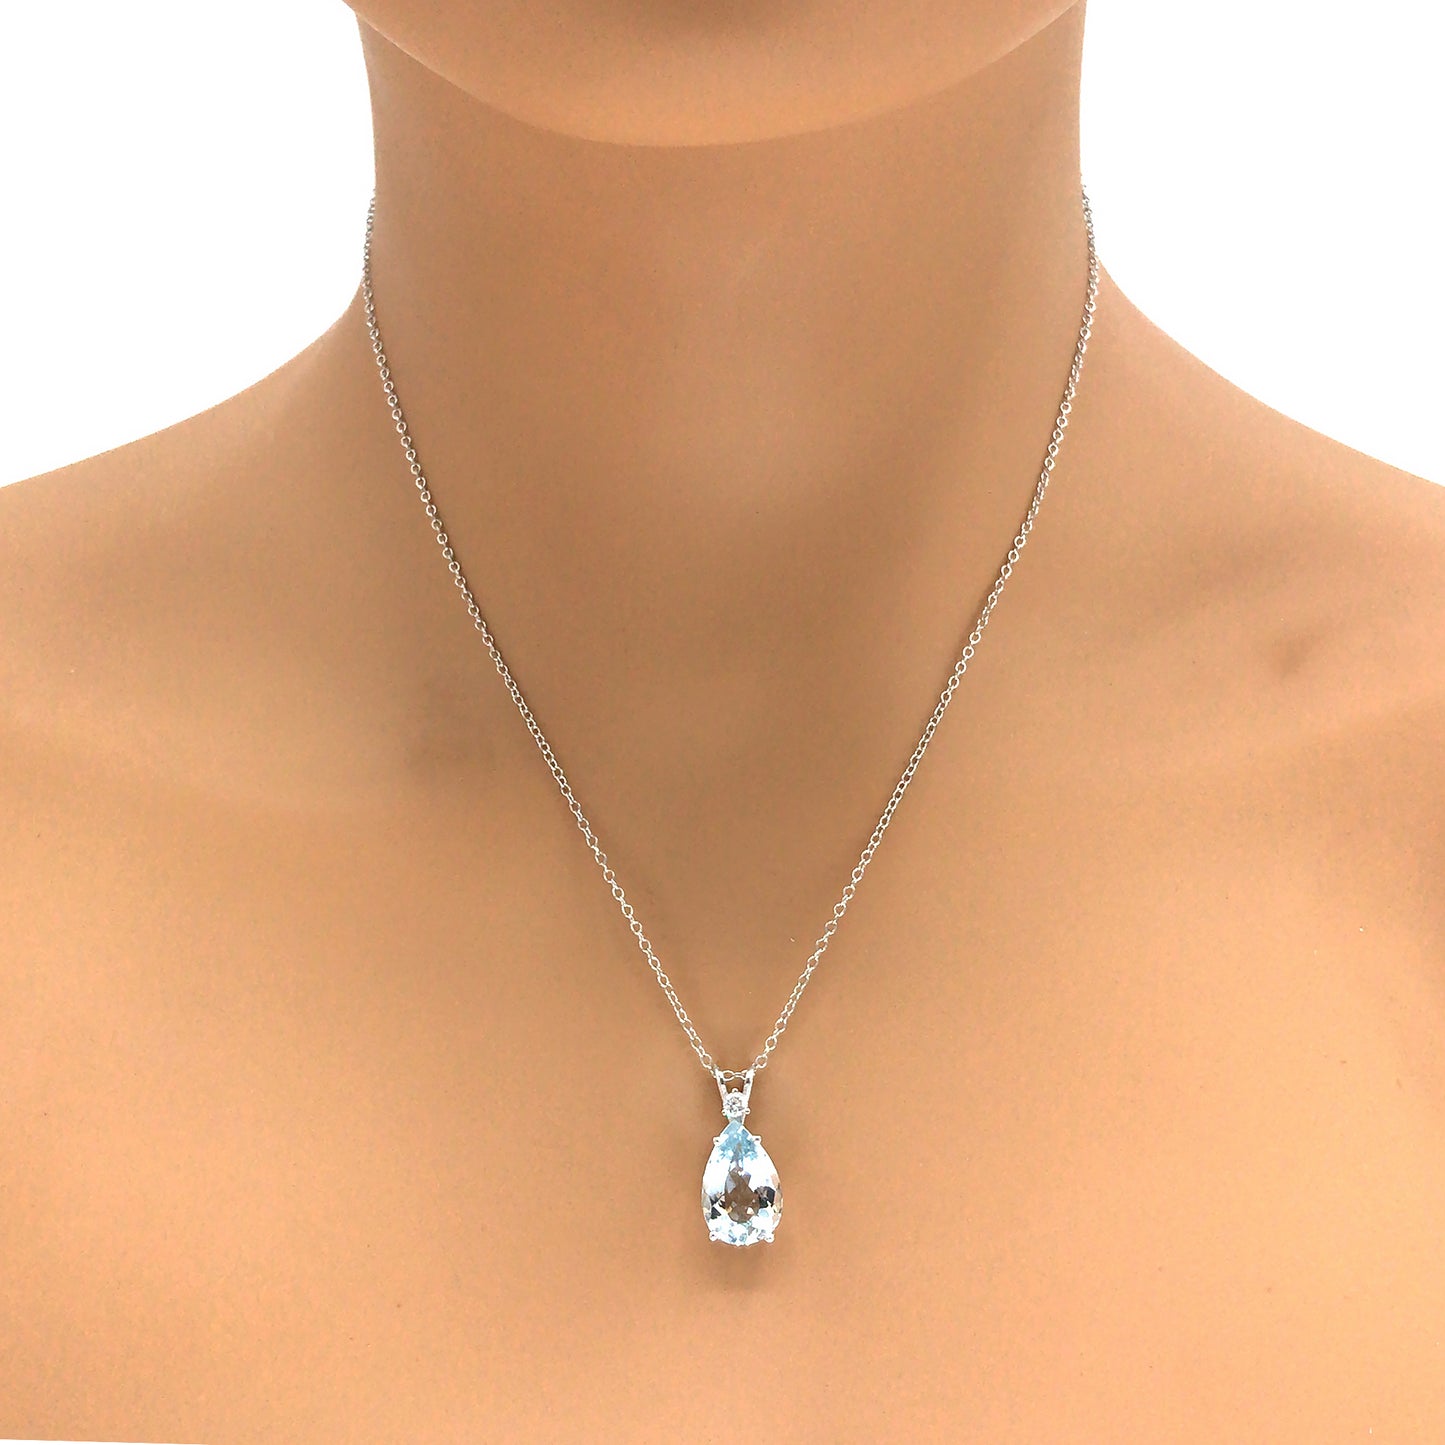 Load image into Gallery viewer, 14k White Gold Pear Shaped Aquamarine Pendant Necklace
